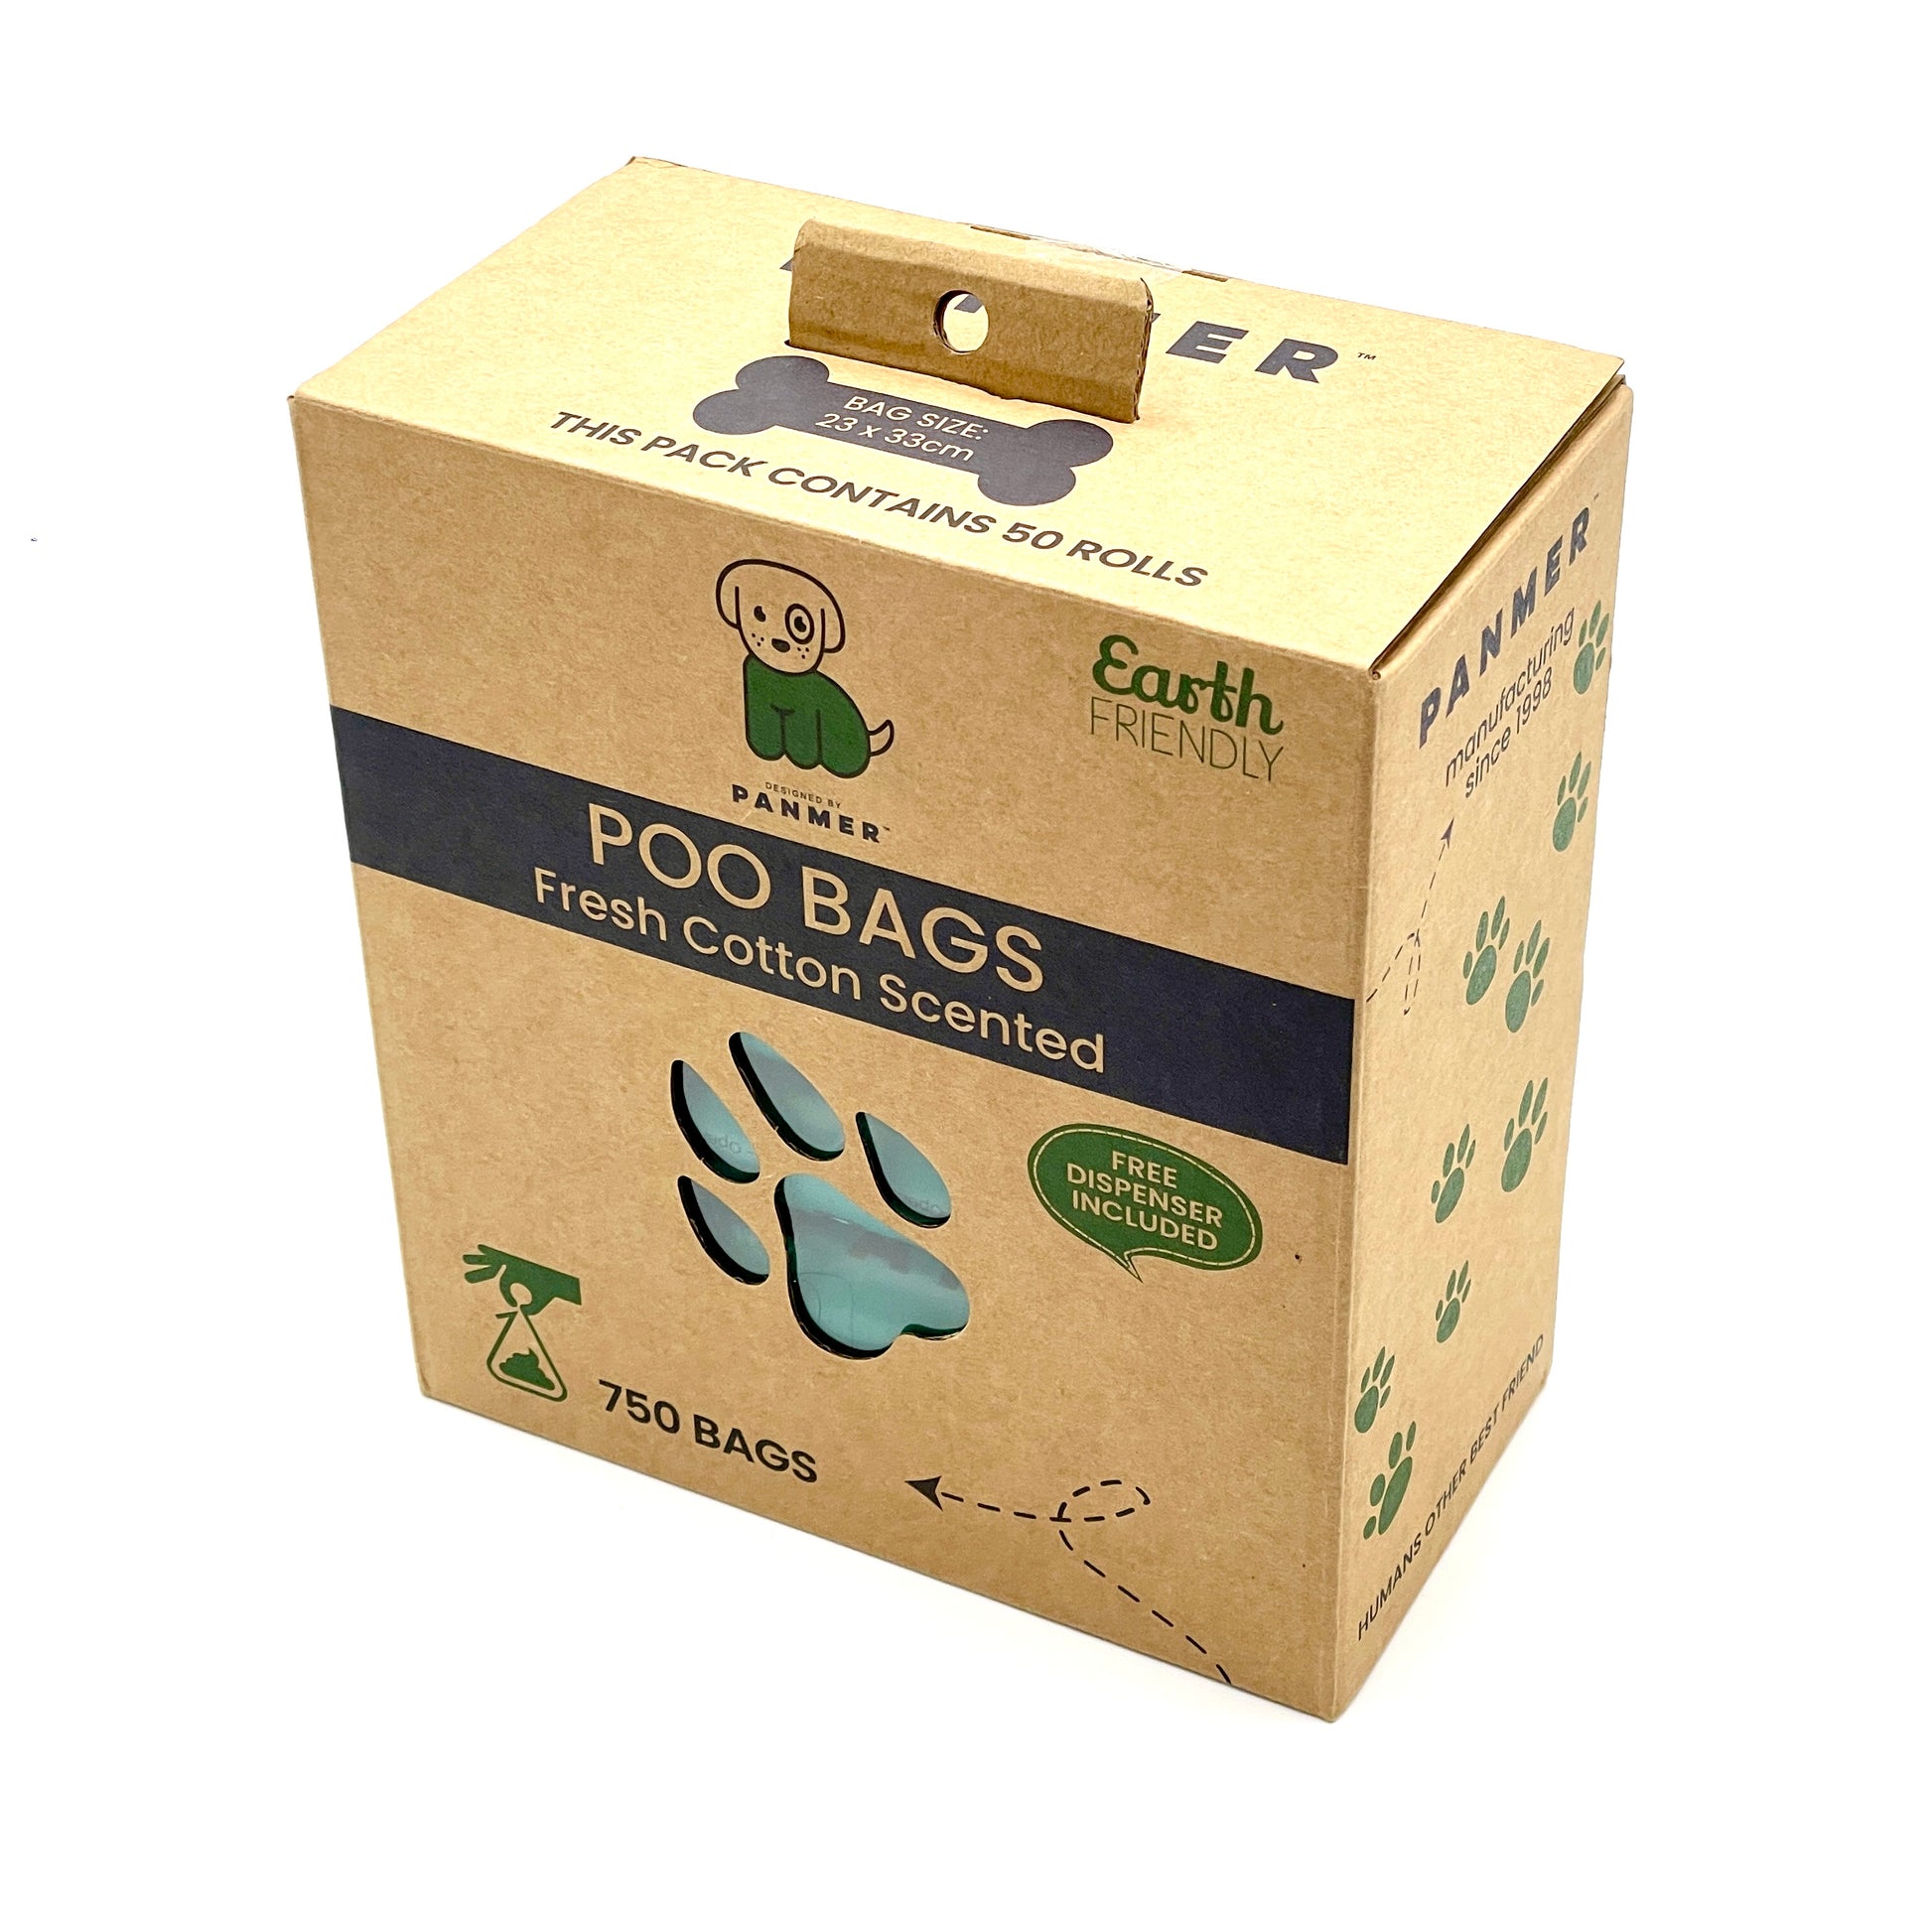 WHOLESALE – Poo Bags - PCR – Rolls – Cotton Fresh Scented – 750bags - #PCRPB750 - Pet Wipes & Poo Bags